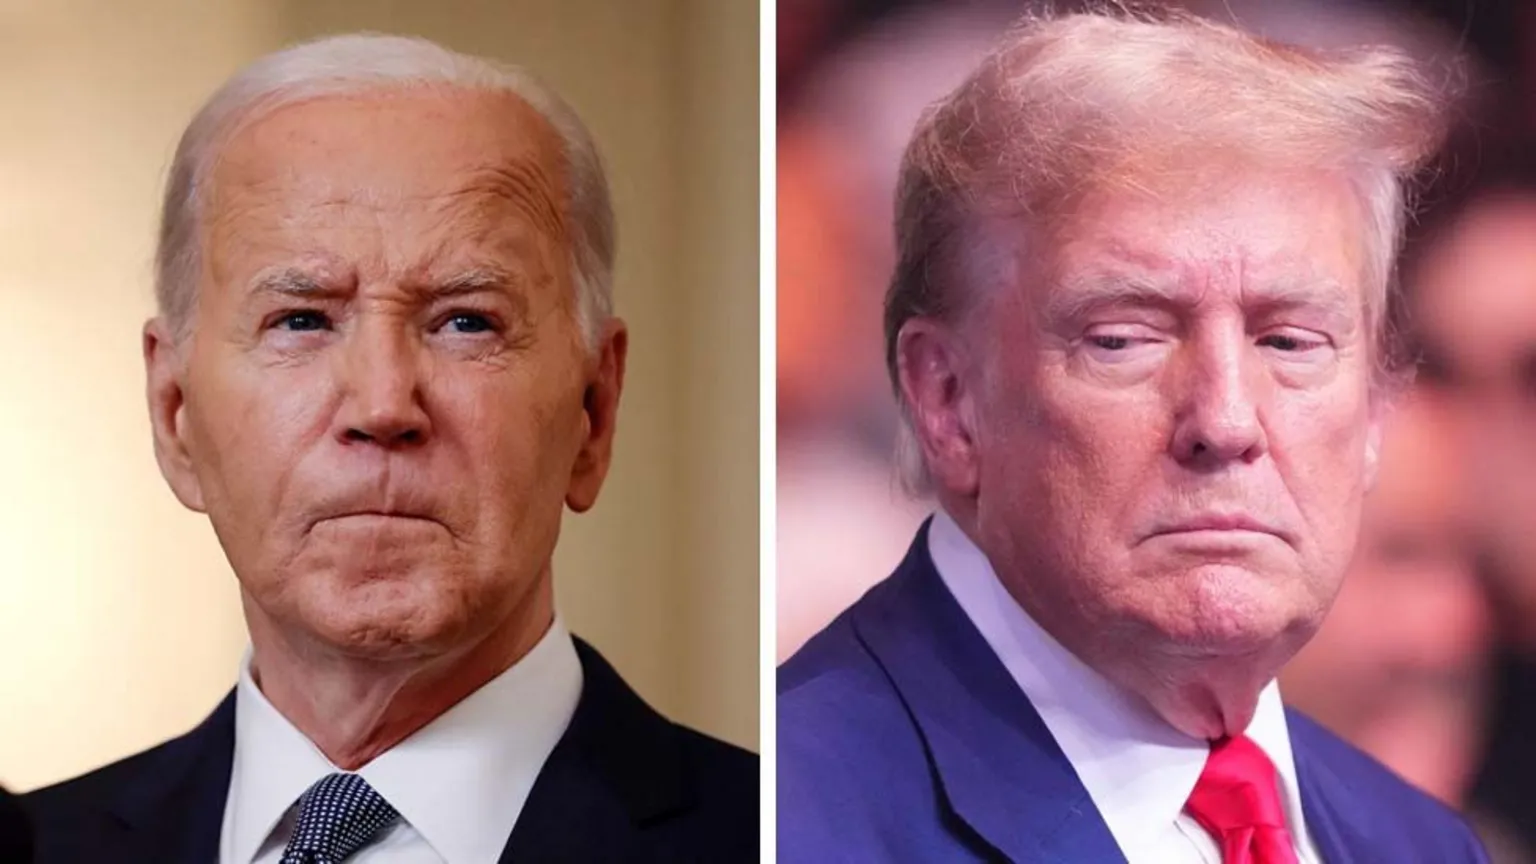 President Joe Biden, 81, and former president Donald Trump, 78, are the two oldest major party candidates for the US presidency.